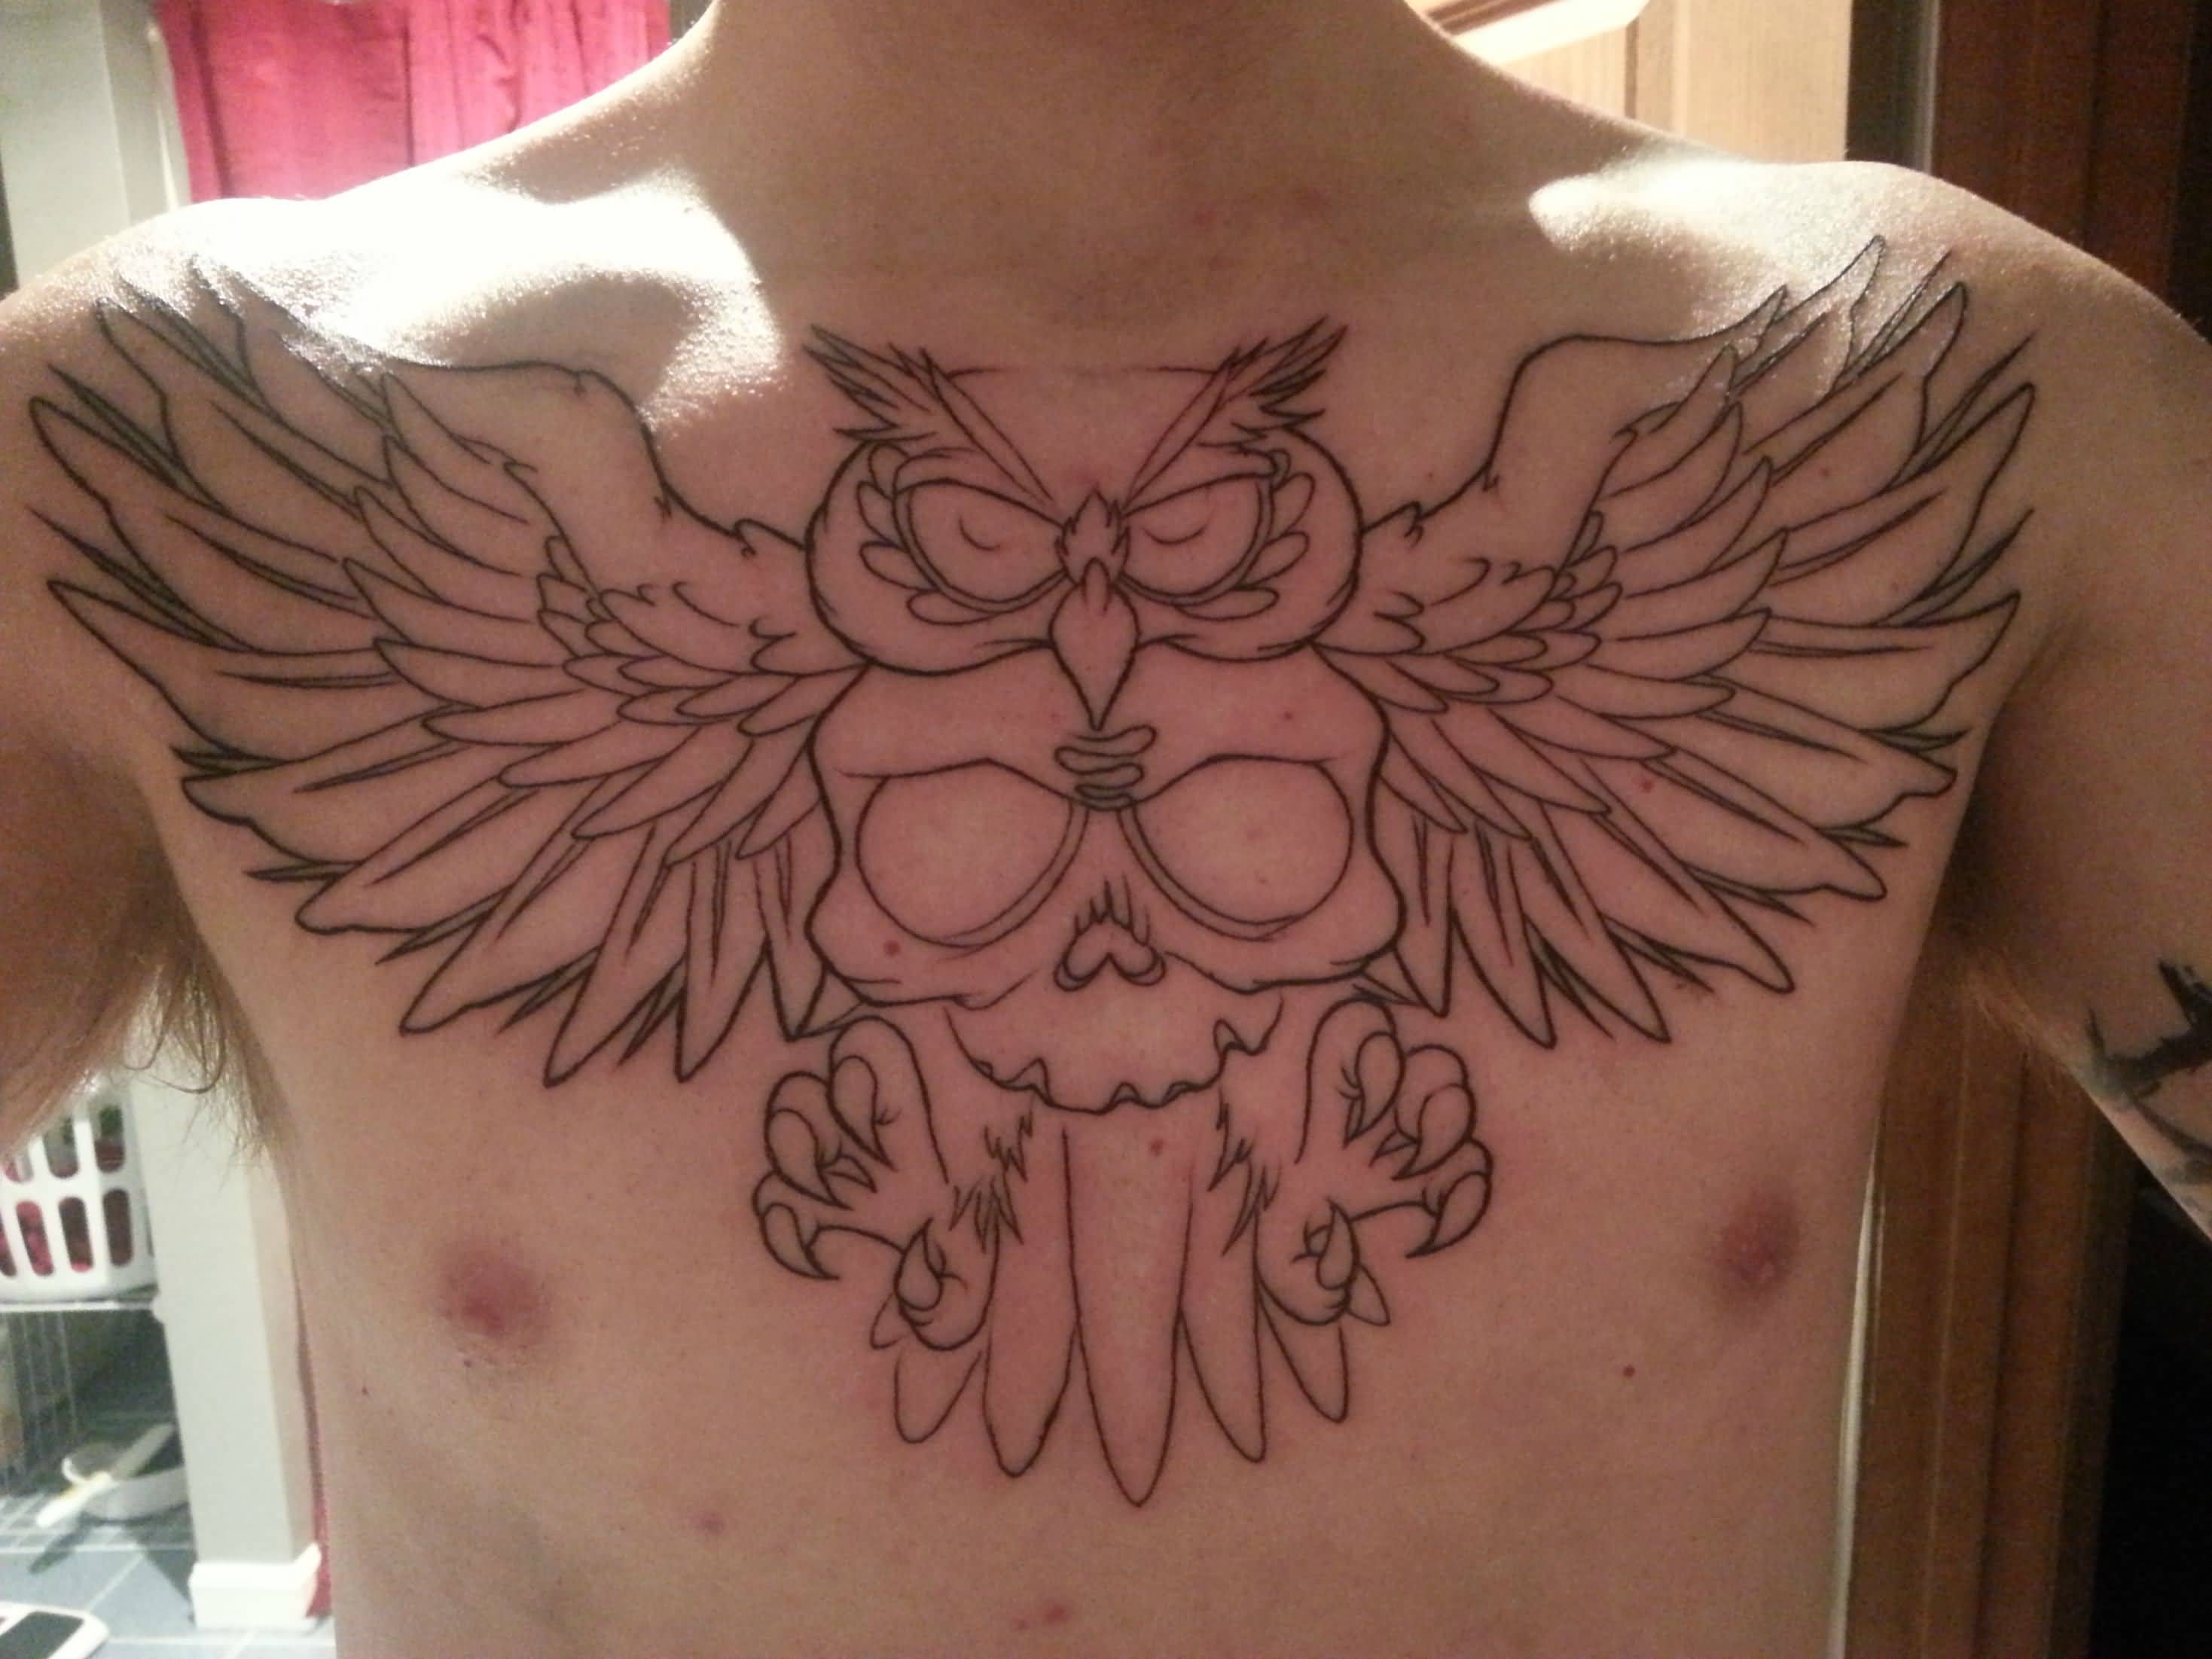 Classic Black Outline Owl With Skull Tattoo On Man Chest By Emily Chance